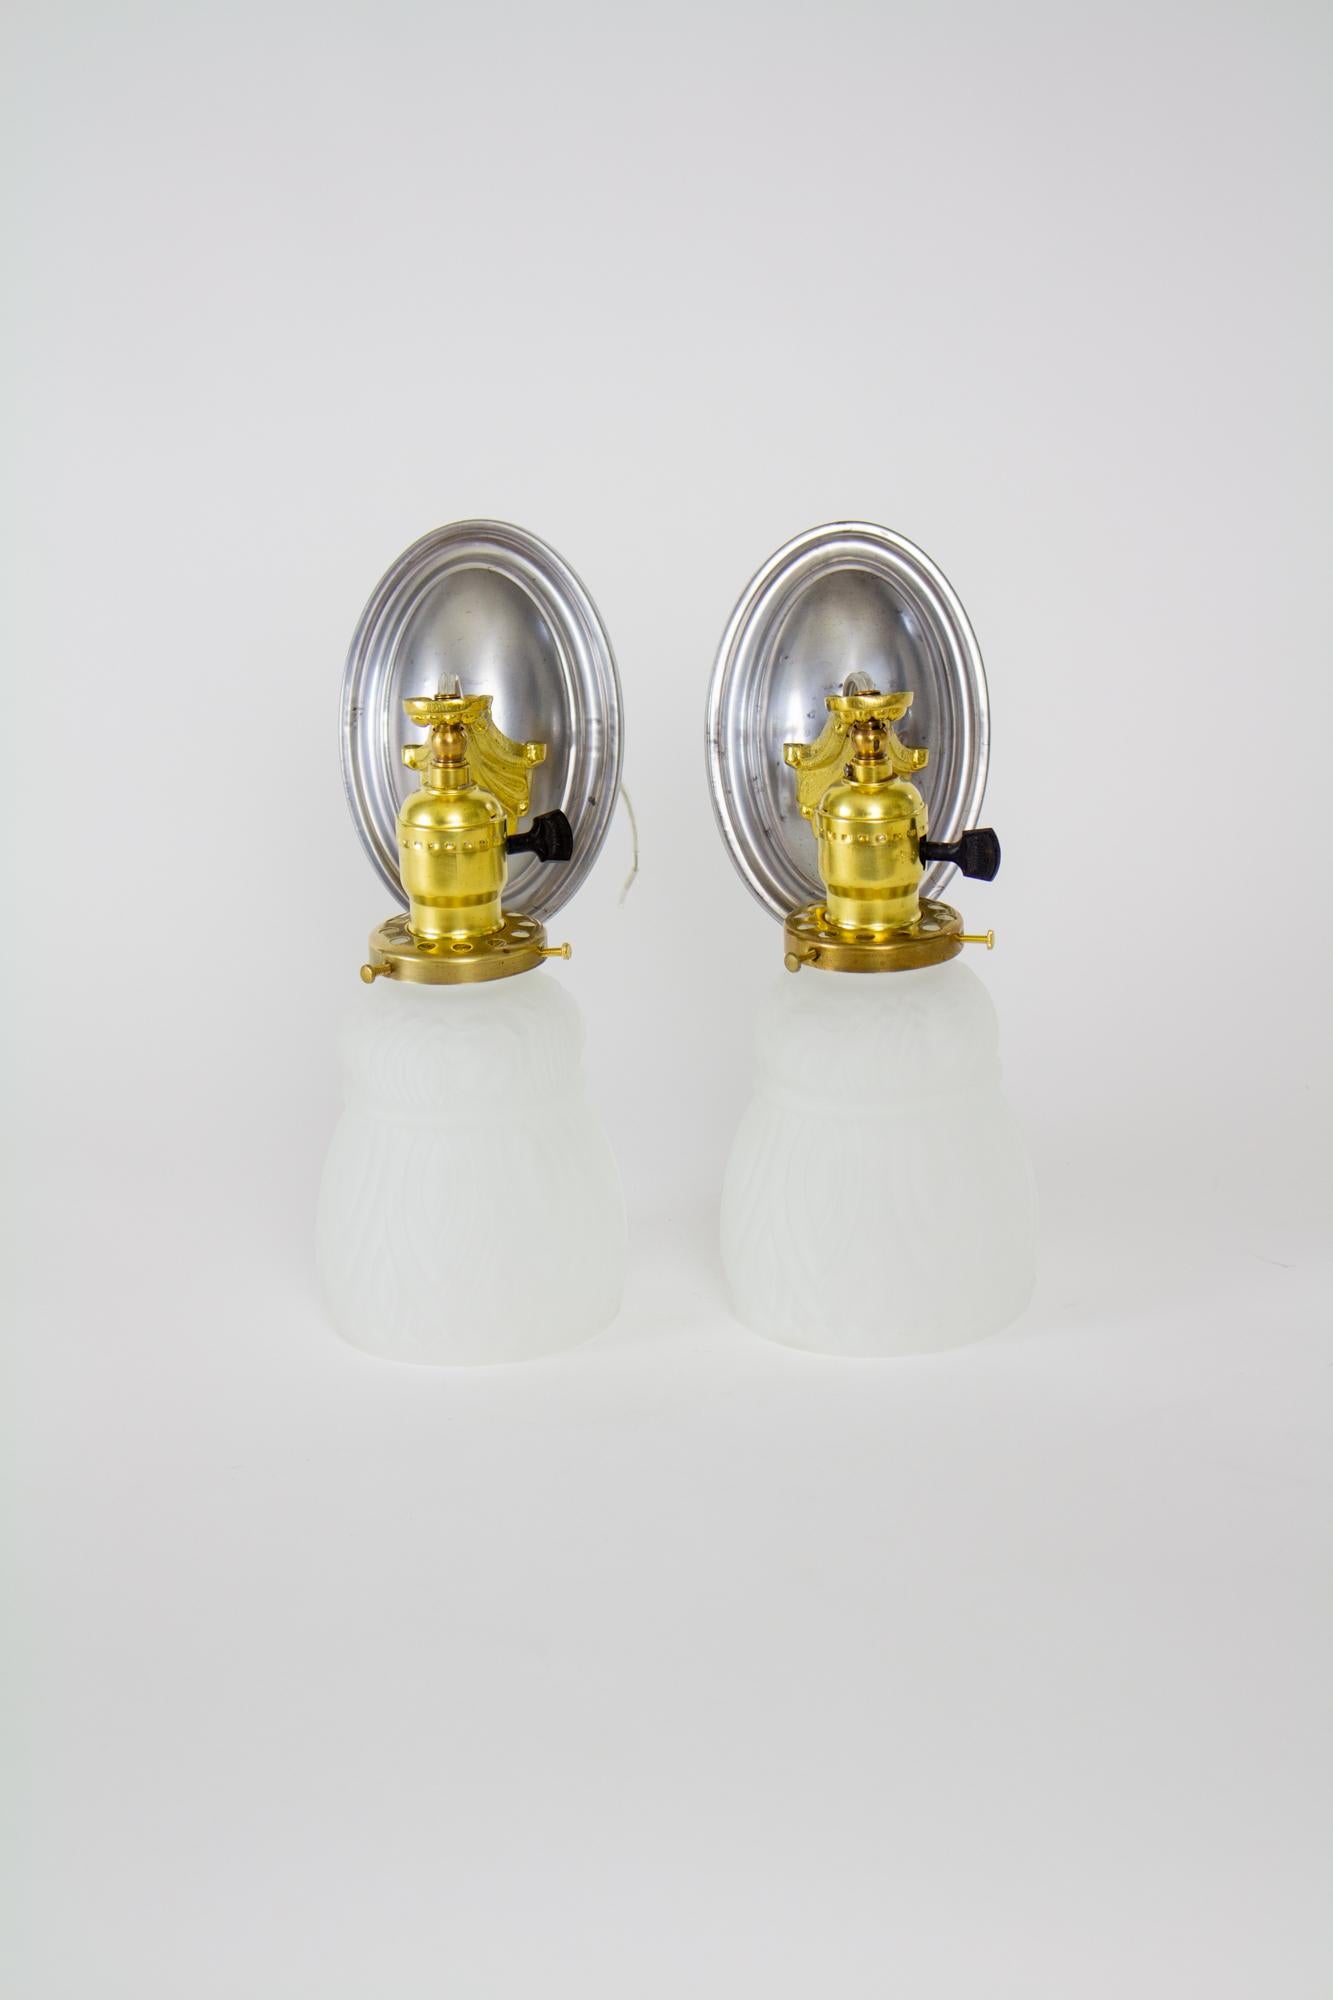 Early 20th Century mixed metal revival sconces with frosted glass - a pair. Oval backplate in steel with cast brass down hanging arm and a single light. Glass is a thick pressed frosted glass with a tulip form. Glass in excellent condition, some